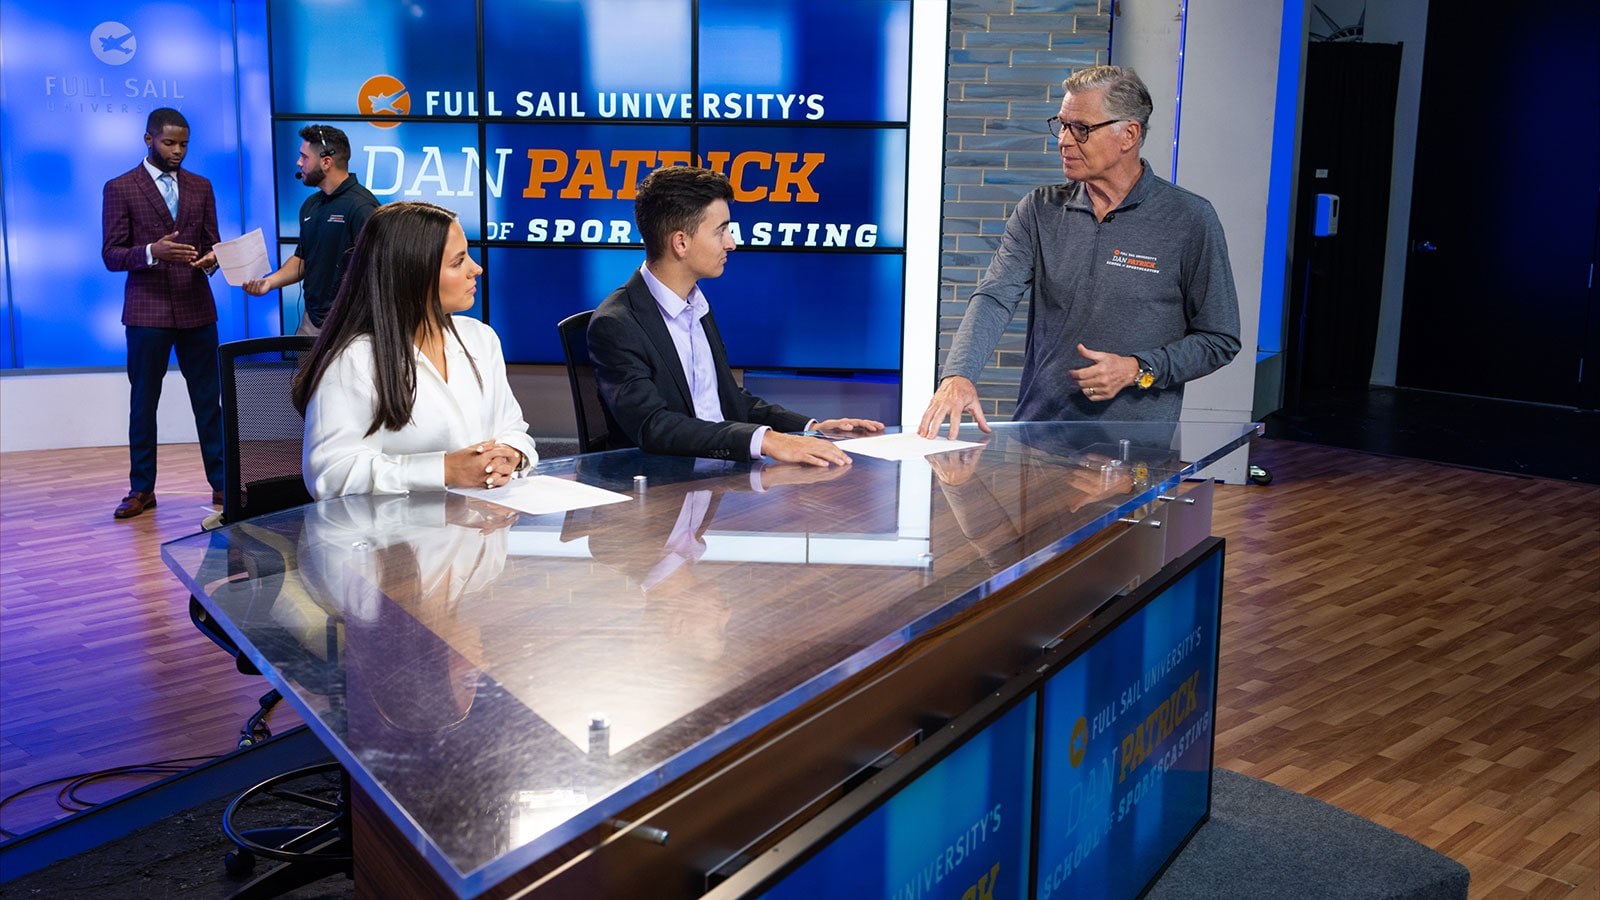 Sportscaster Dan Patrick standing at a news desk speaking with two students at the Full Sail University Dan Patrick School of Sportscasting soundstage.